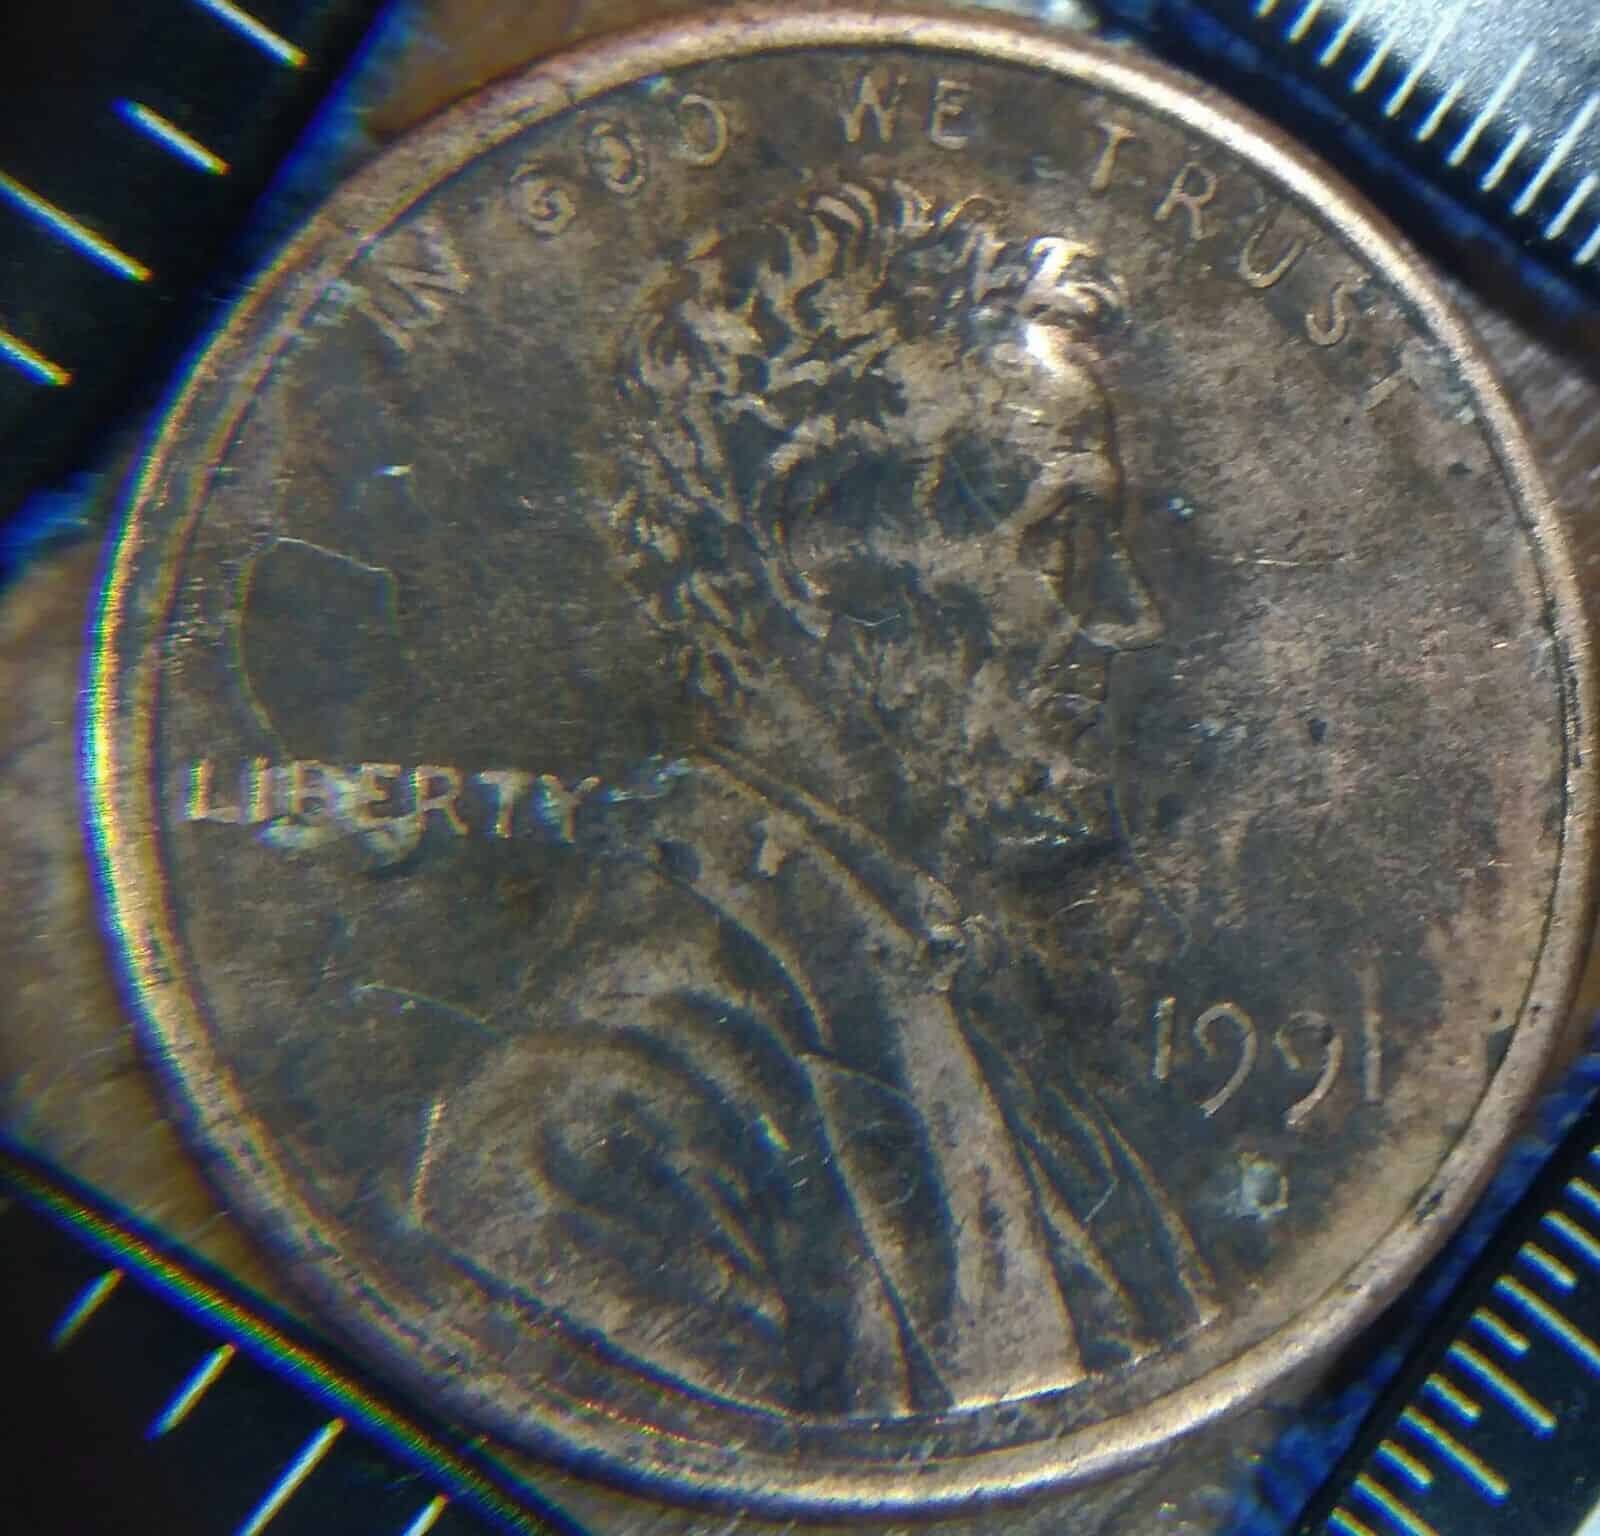 1991 D Penny  Back Room Holdings  No Match Like It. Well Groomed Coin